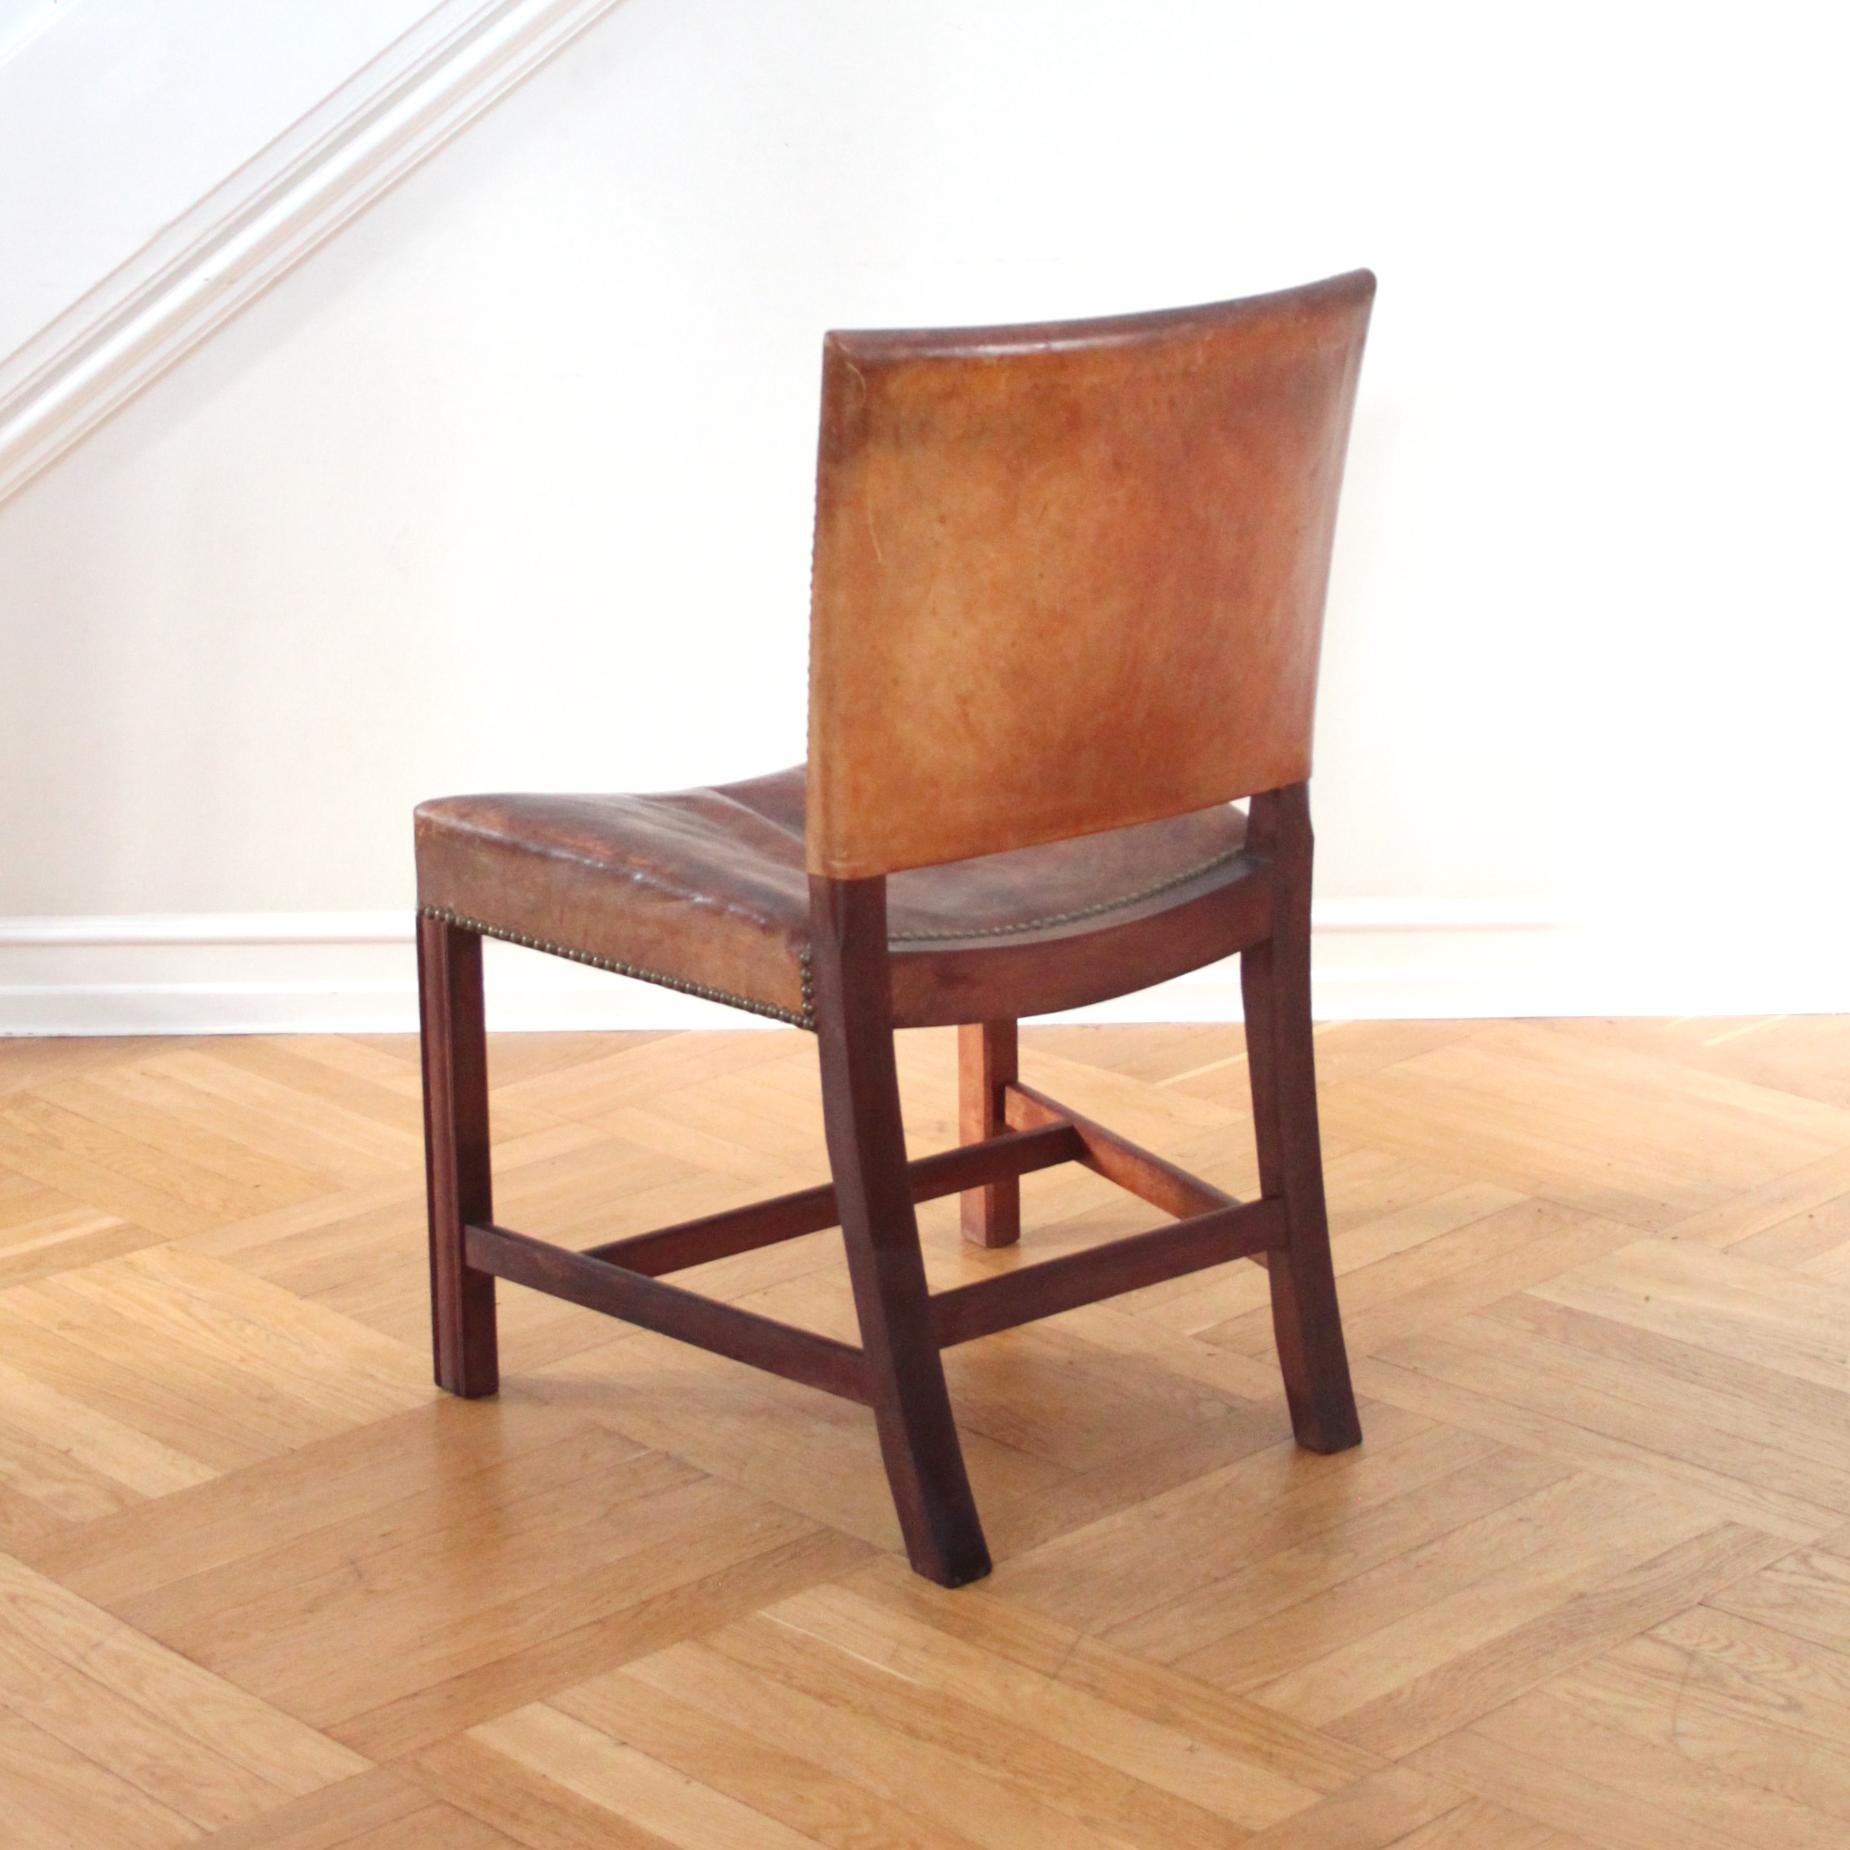 Danish Kaare Klint Red Chair, Rud Rasmussen, Original Niger Leather and Mahogany frame For Sale